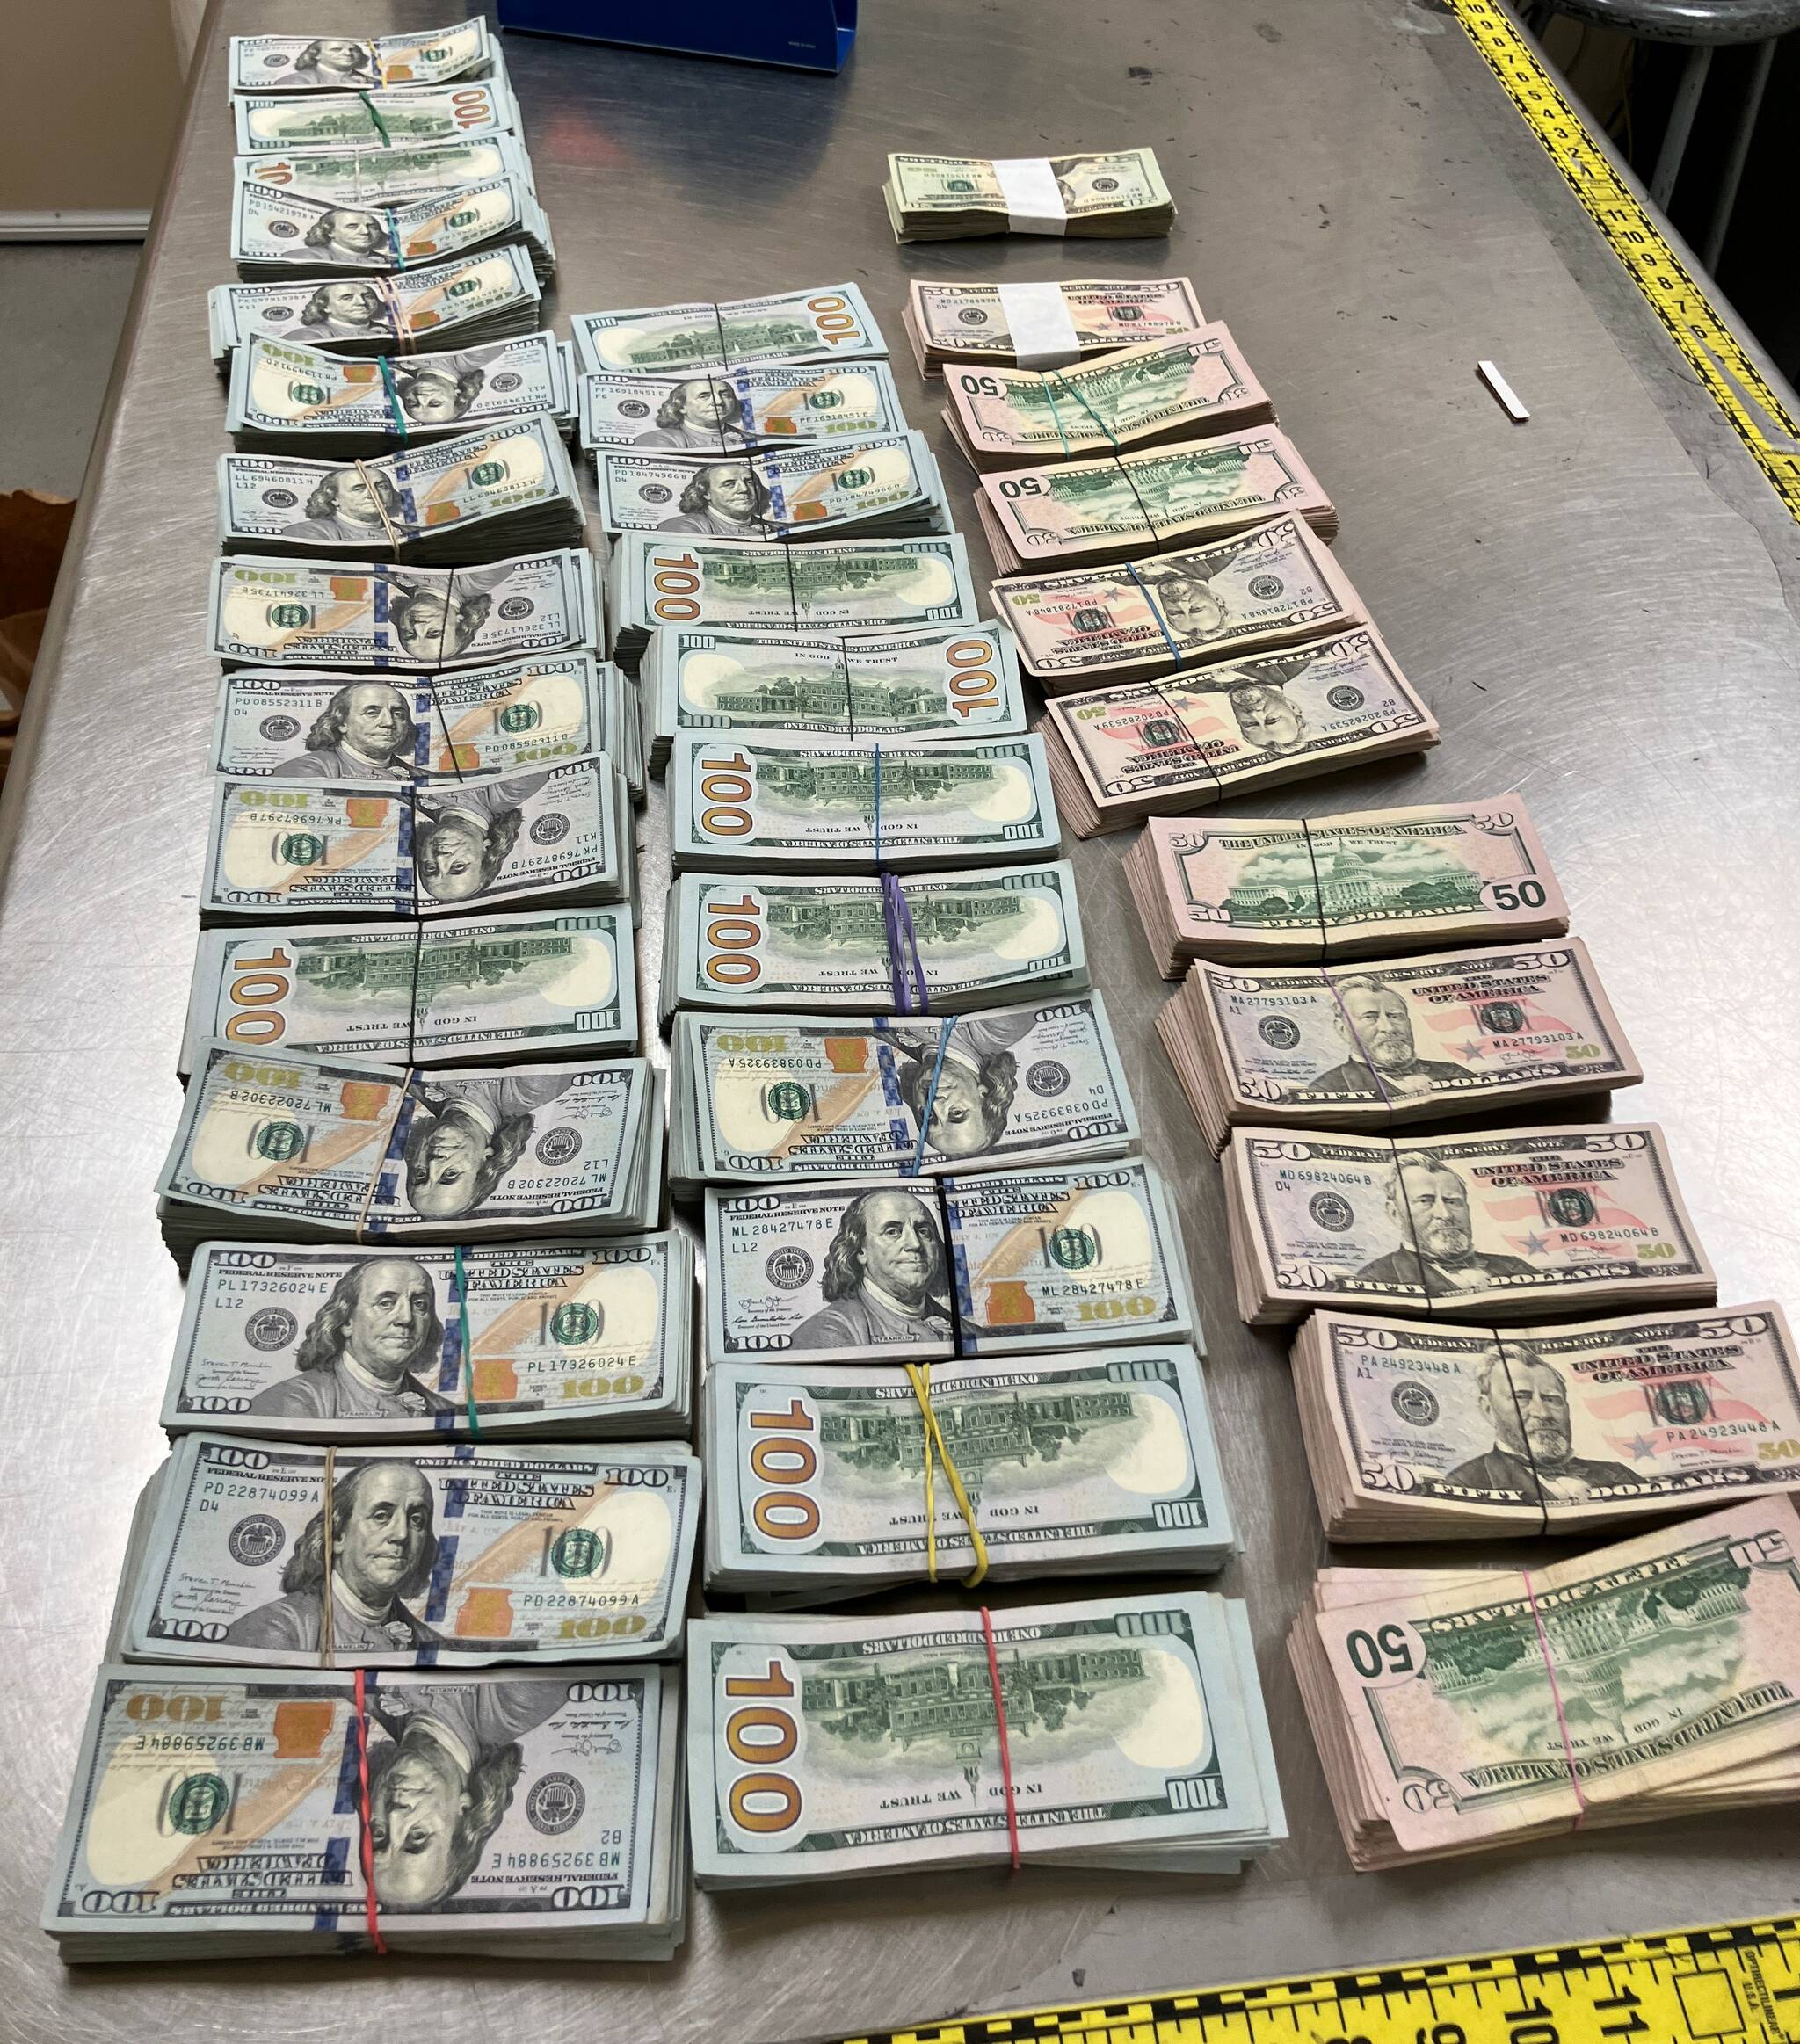 Cash seized by the Renton Police Department from the March 14 drug bust. (Courtesy of the Renton Police Department)